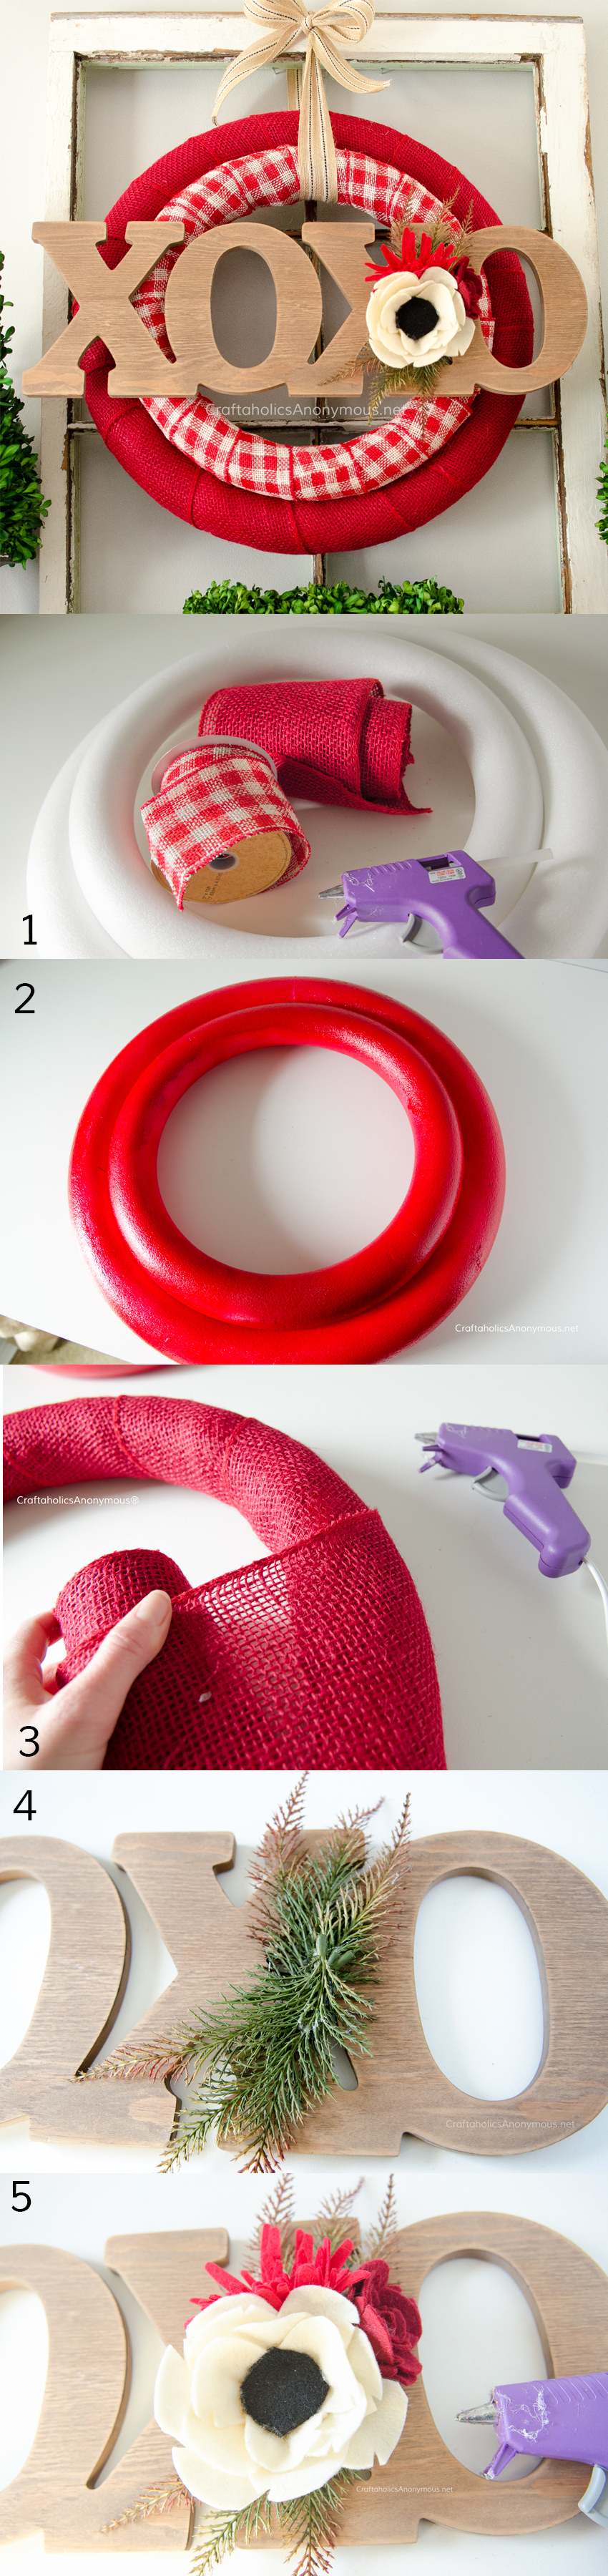 DIY Double Valentine Wreath tutorial :: use 2 wreath forms for a layered look!